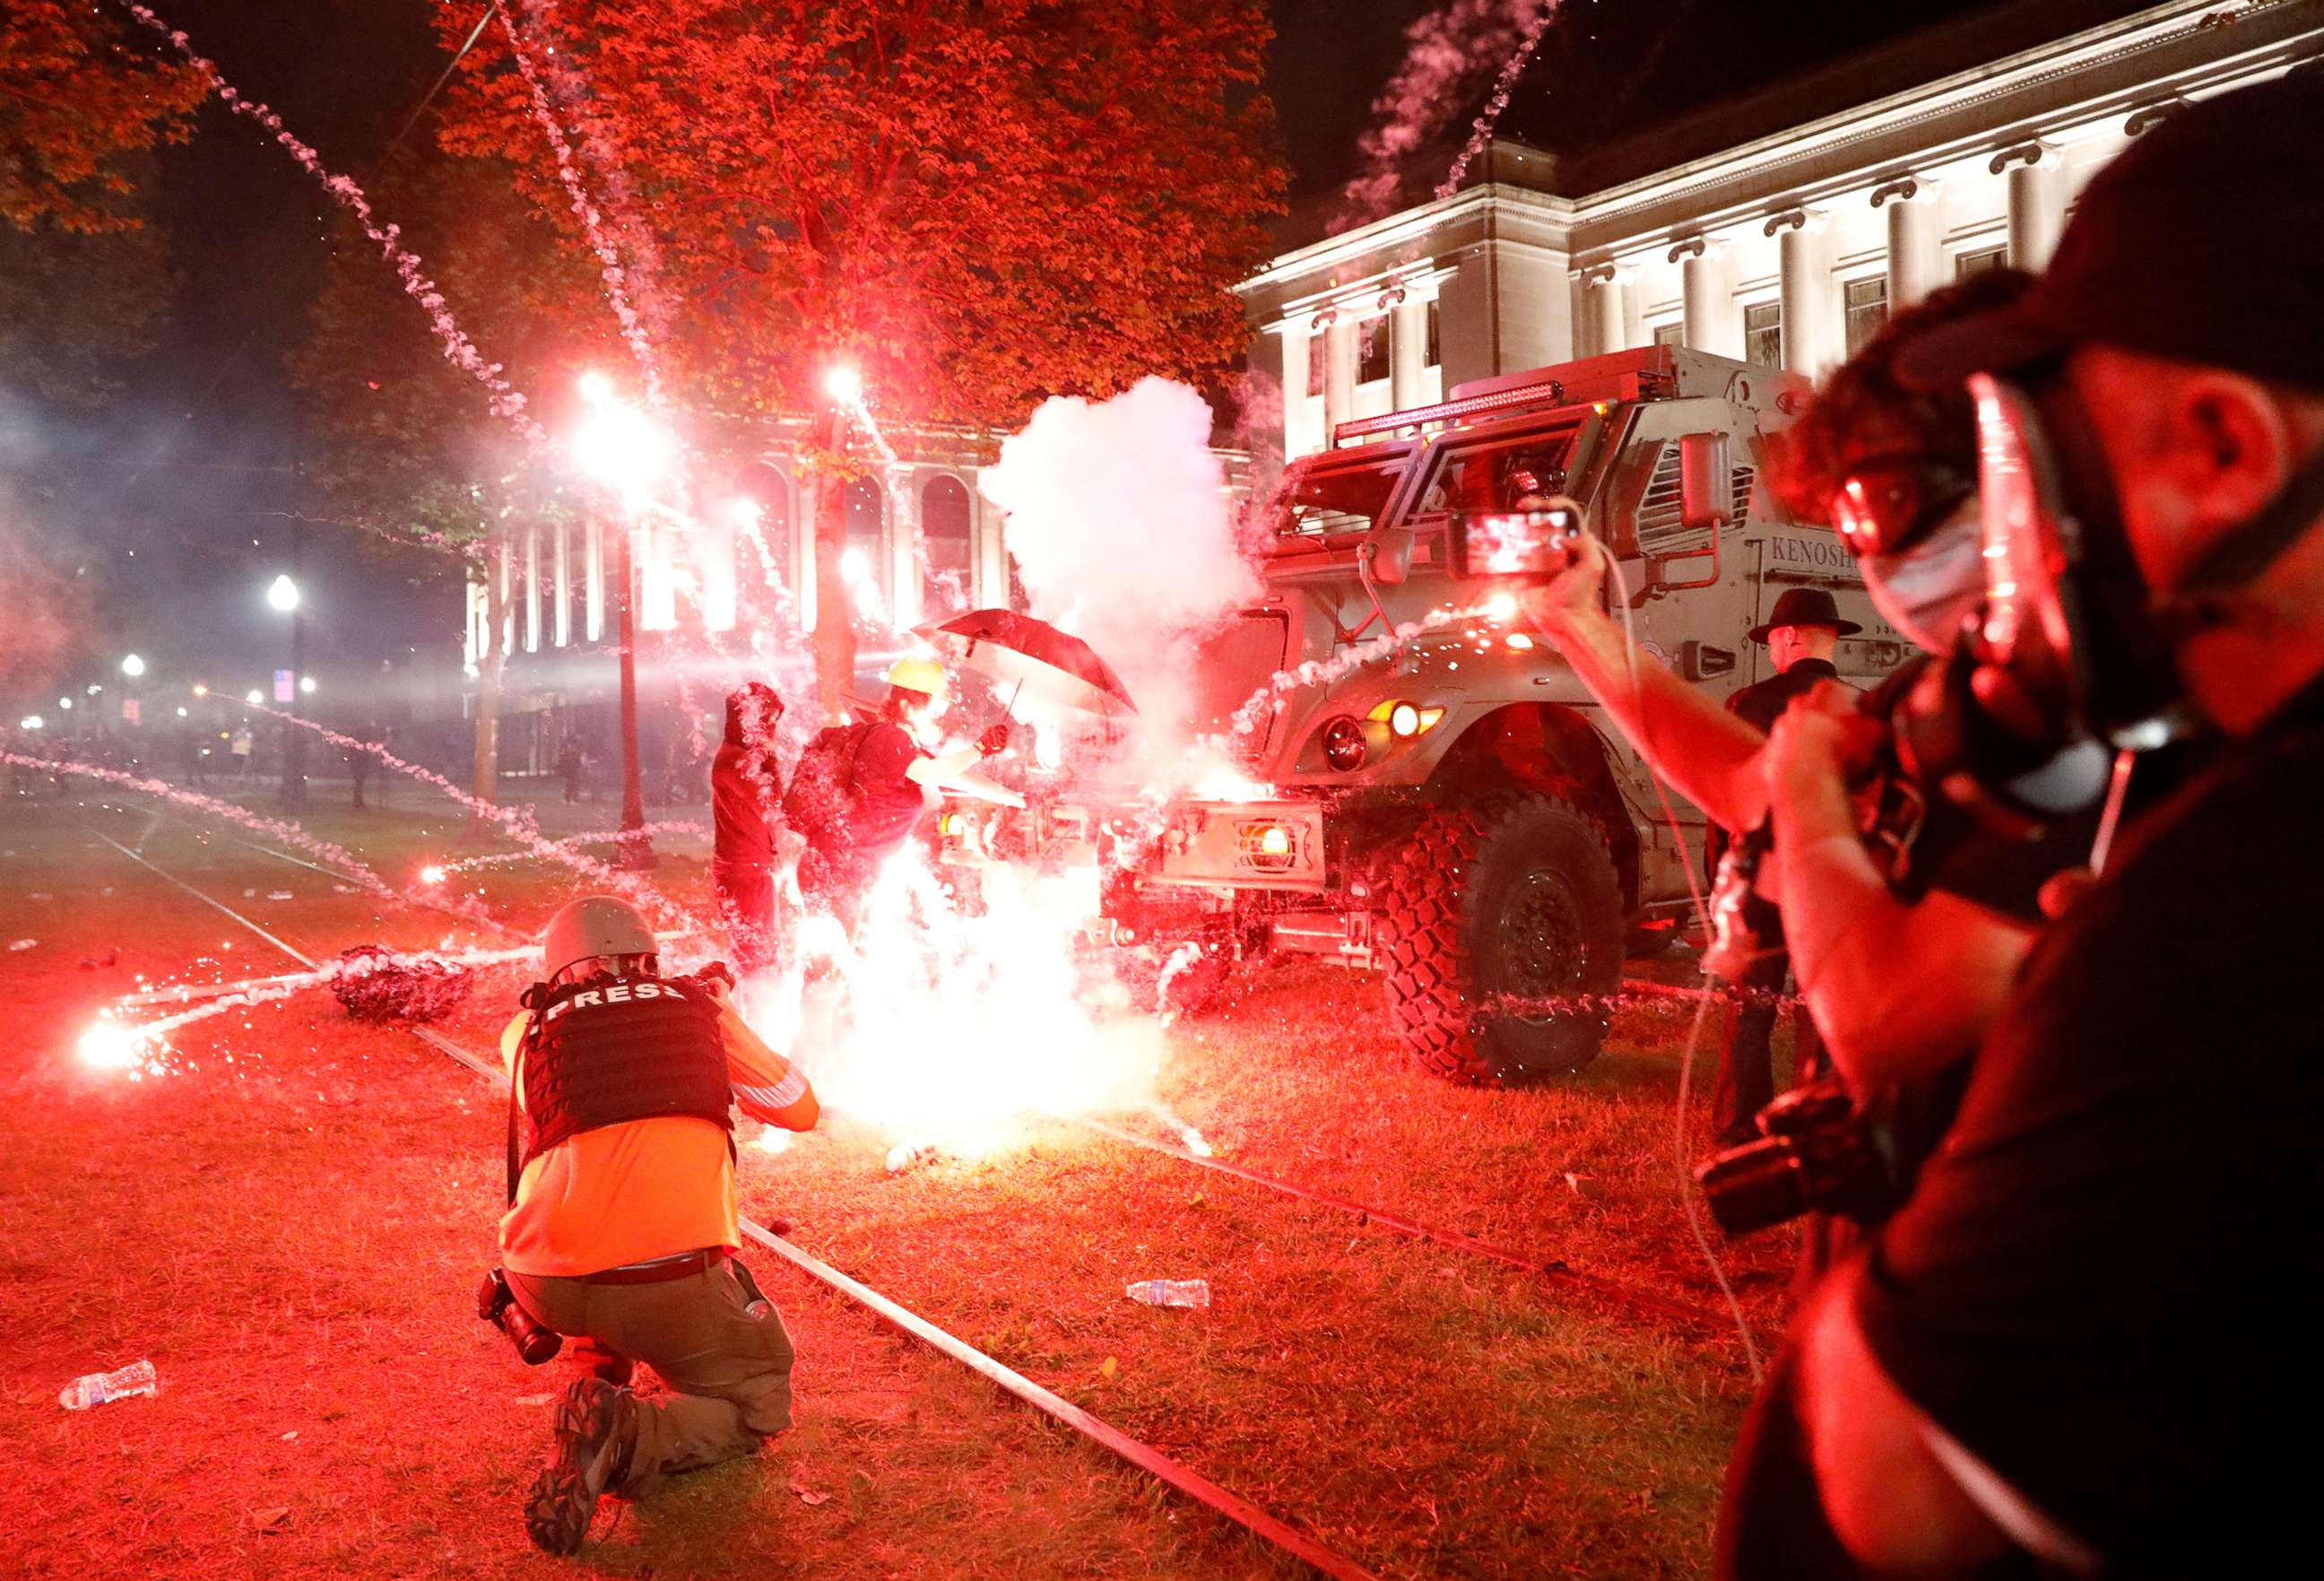 PHOTO: Flares go off in front of a Kenosha Country Sheriff Vehicle as demonstrators take part in a protest following the police shooting of Jacob Blake, a Black man, in Kenosha, Wis., Aug. 25, 2020.